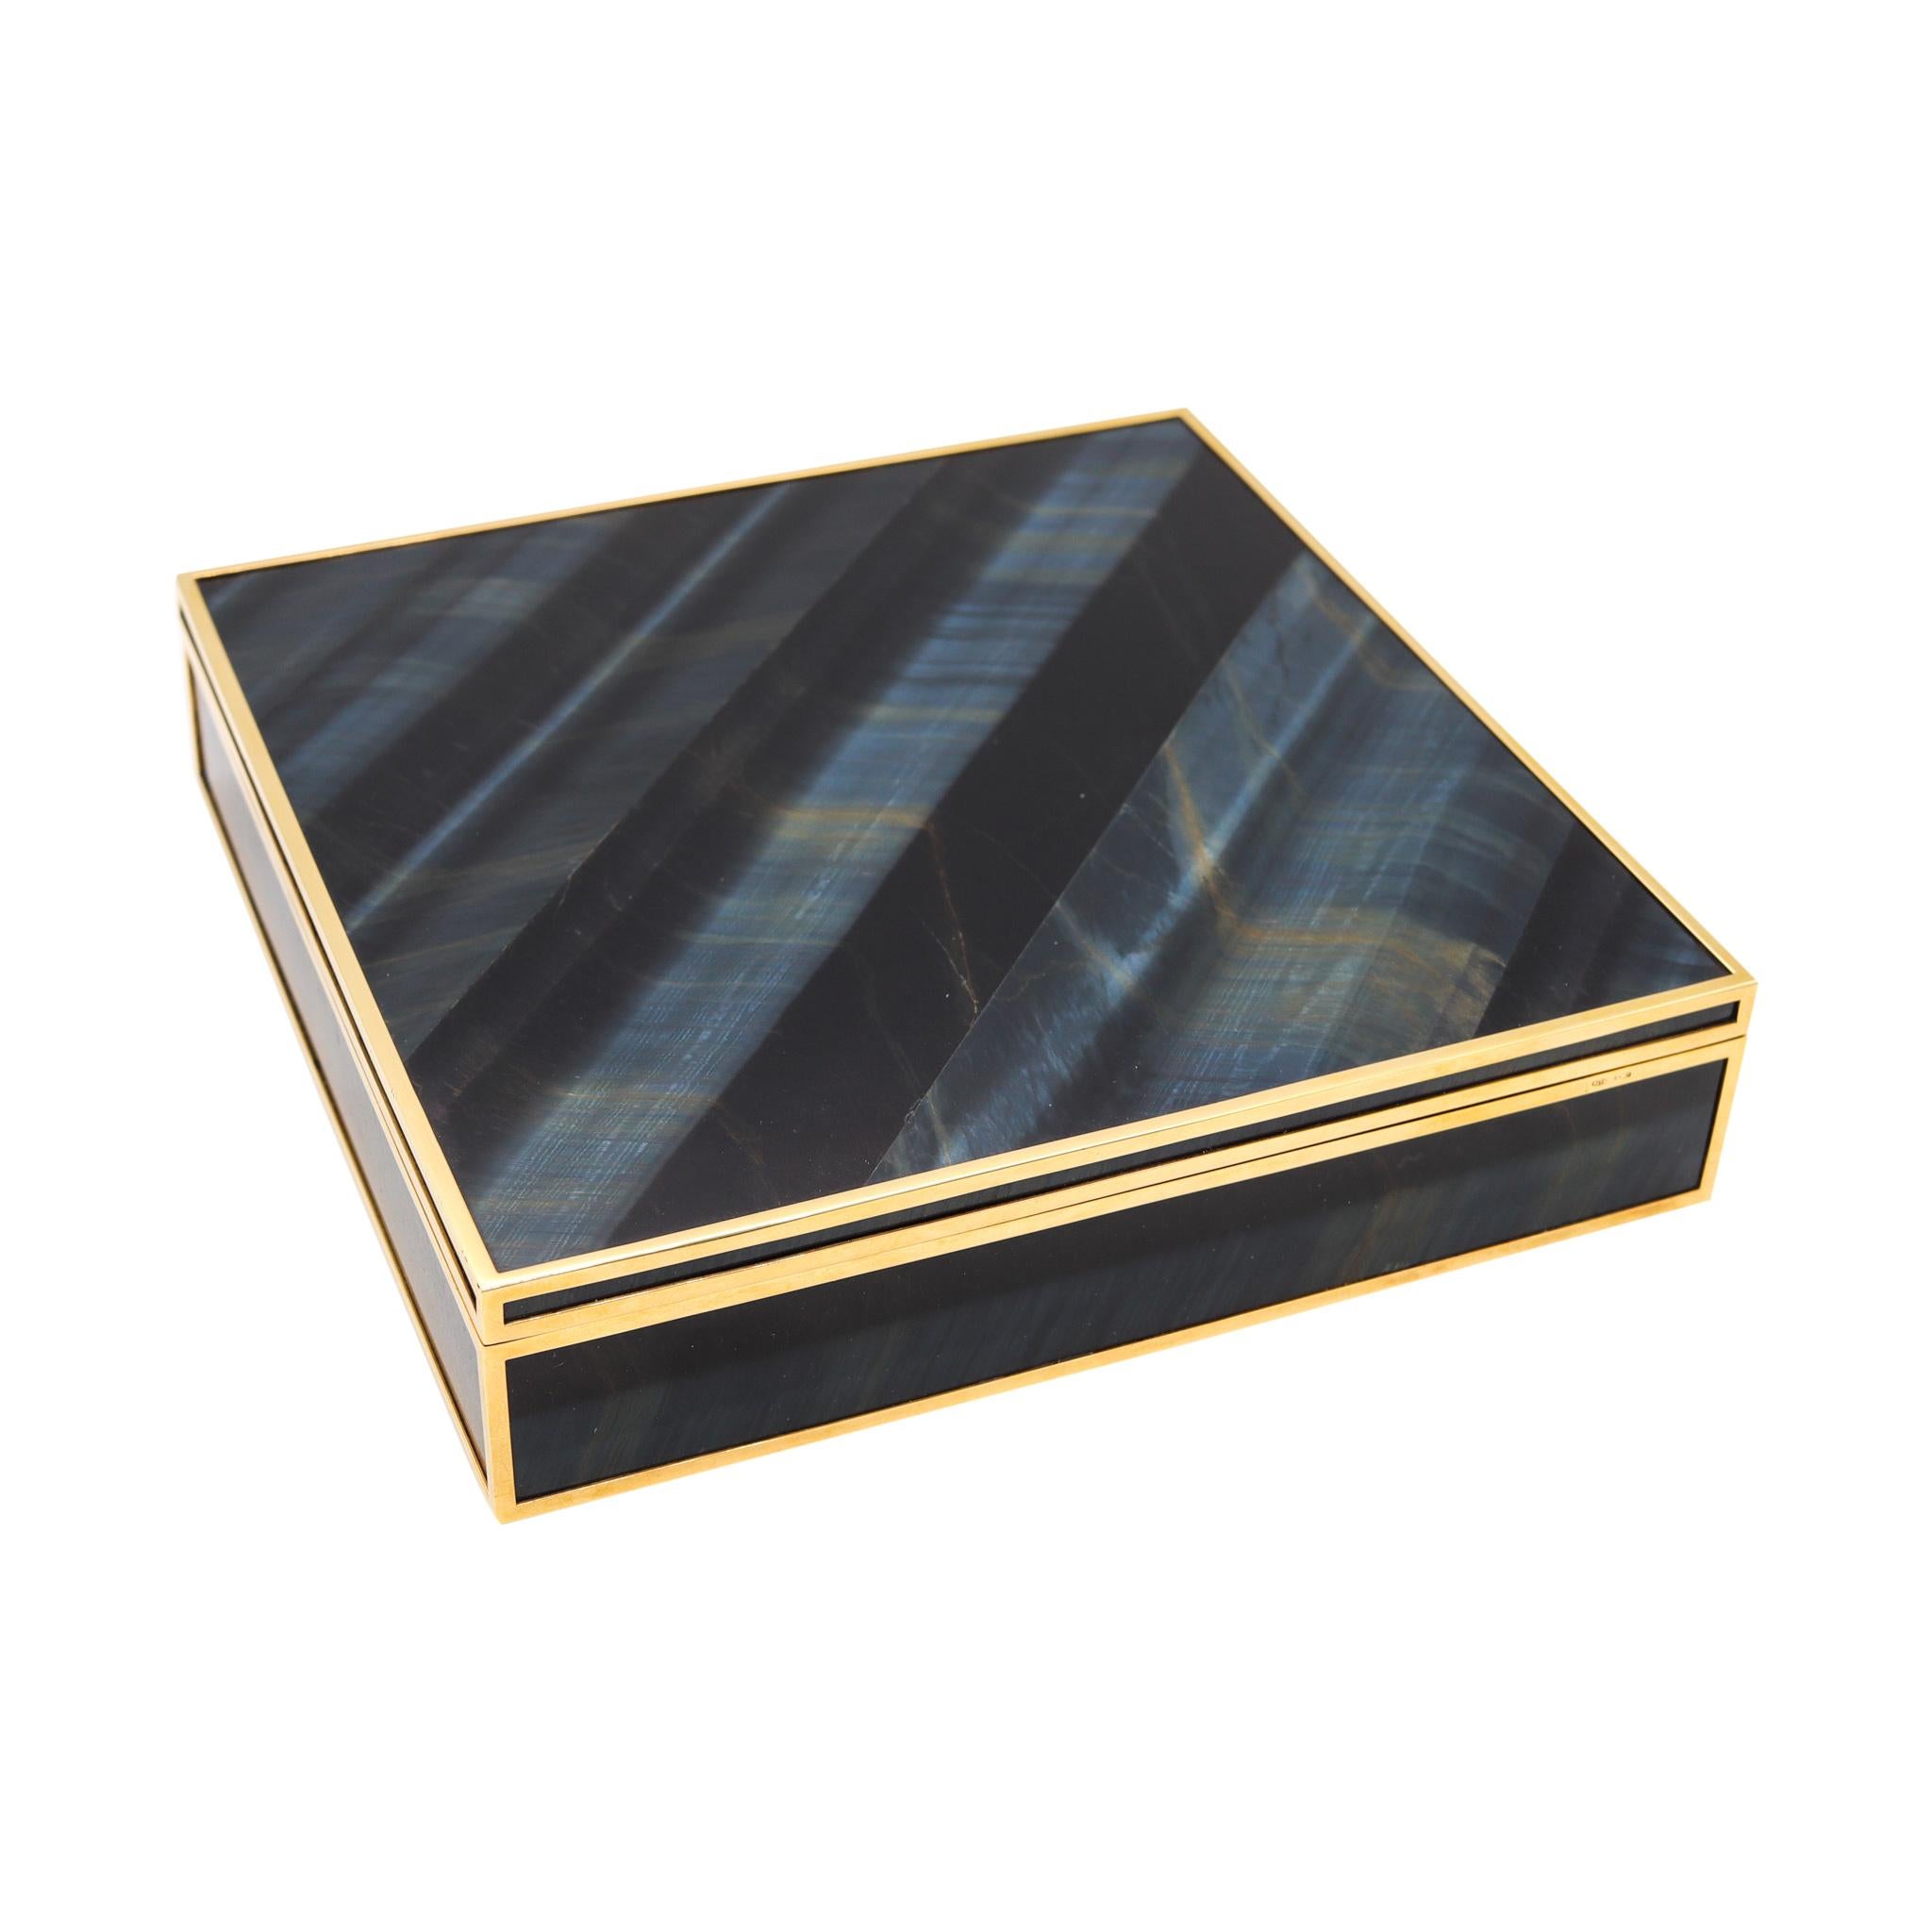 Exceptional desk box designed by Fasano.

A beautiful and one-of-a-kind piece, created in Torino Italy by the master esteemed jeweler, Genesio Fasano. This rare luxury desk box was carefully crafted in solid yellow gold of 18 karats and is